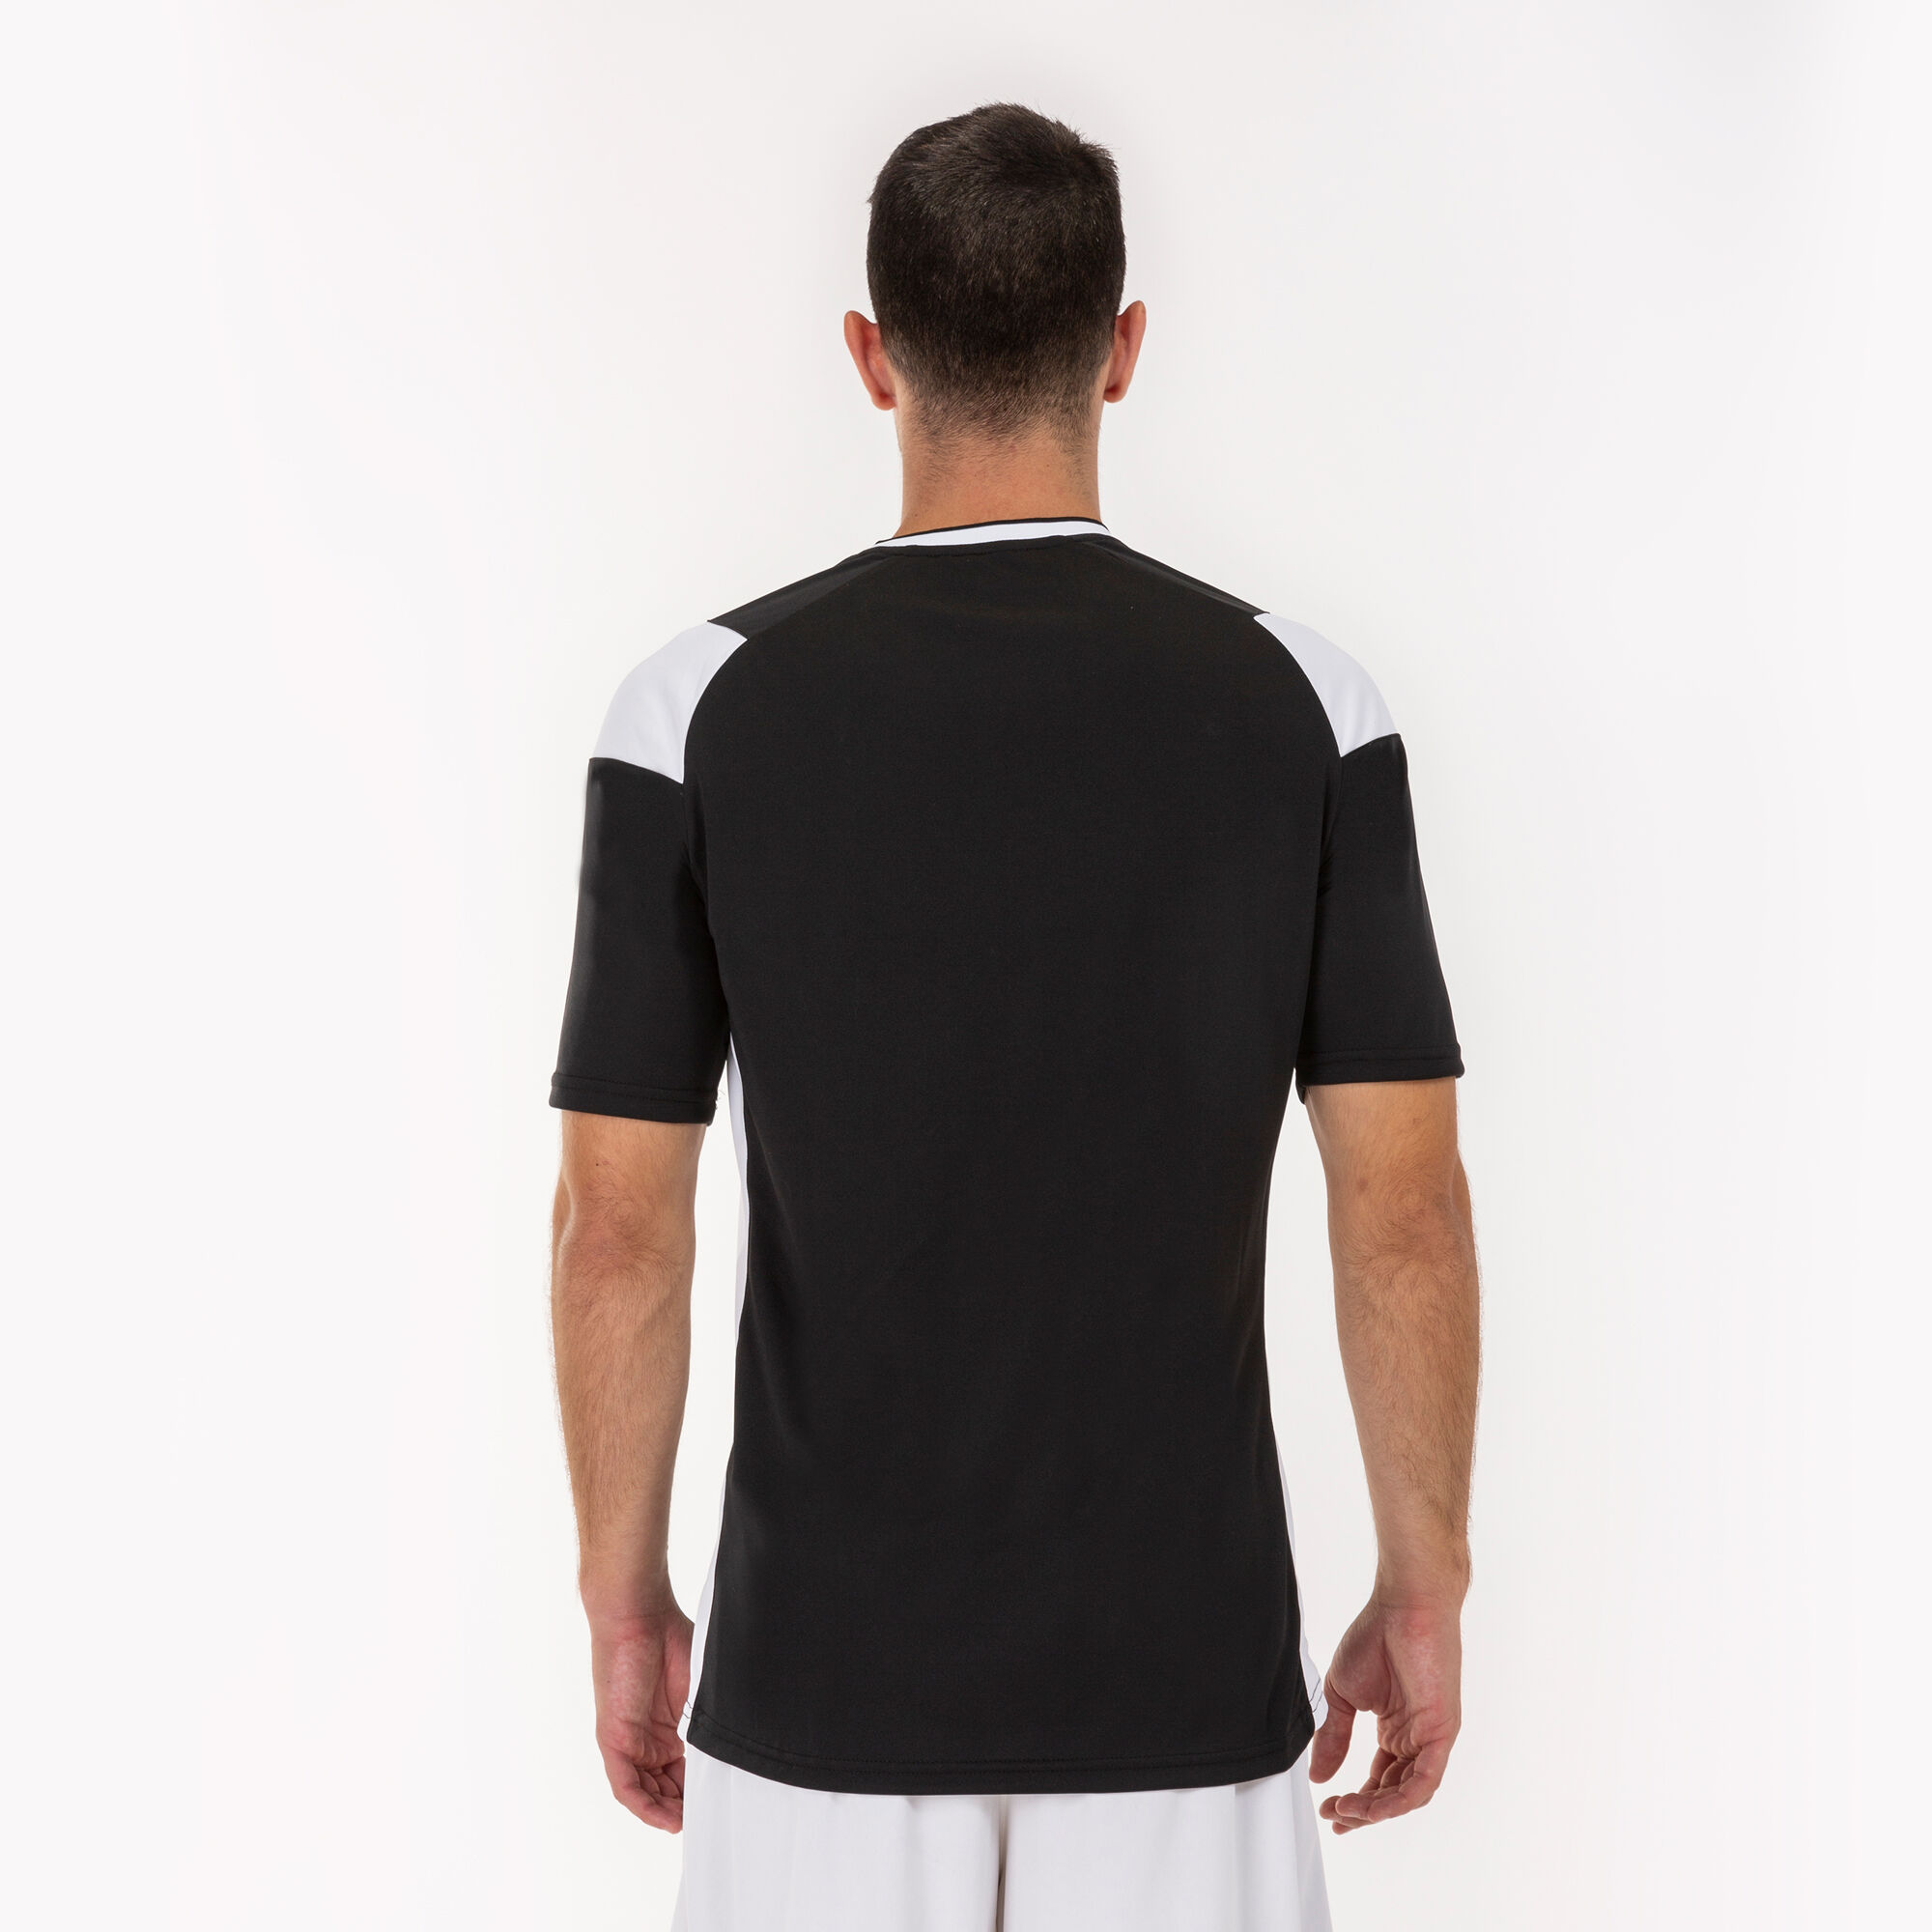 MAILLOT MANCHES COURTES HOMME CREW III NOIR BLANC